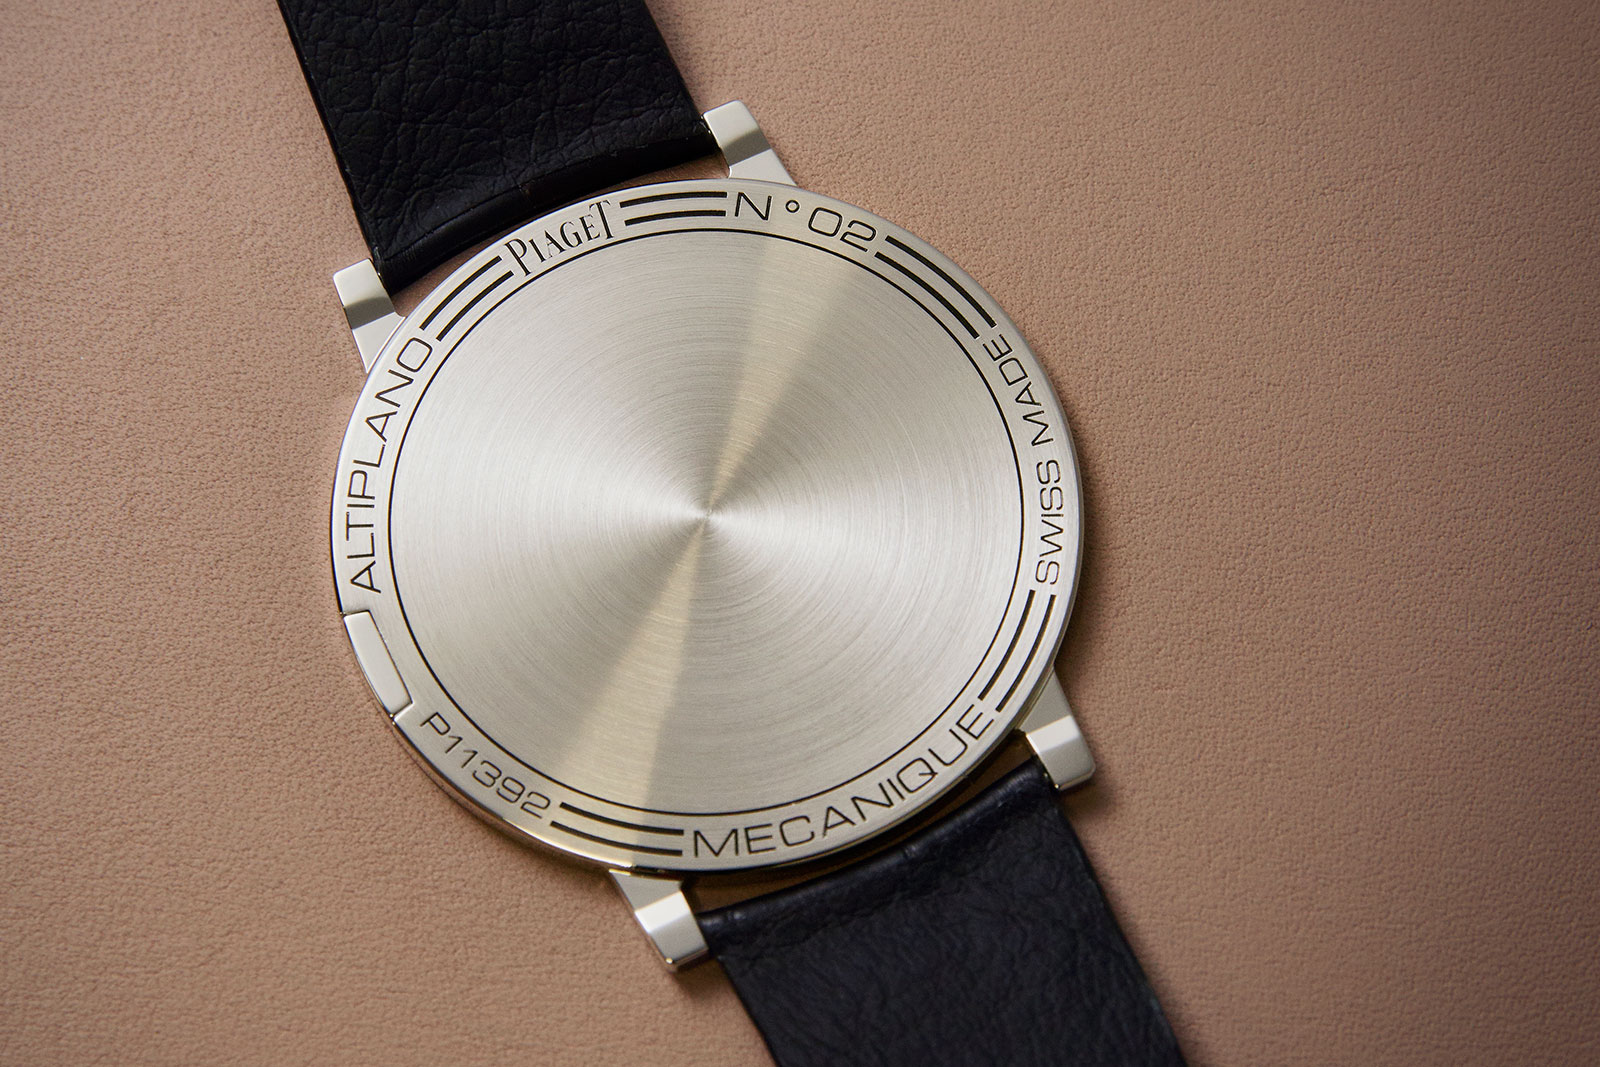 Piaget Altiplano Ultimate Concept watch 2